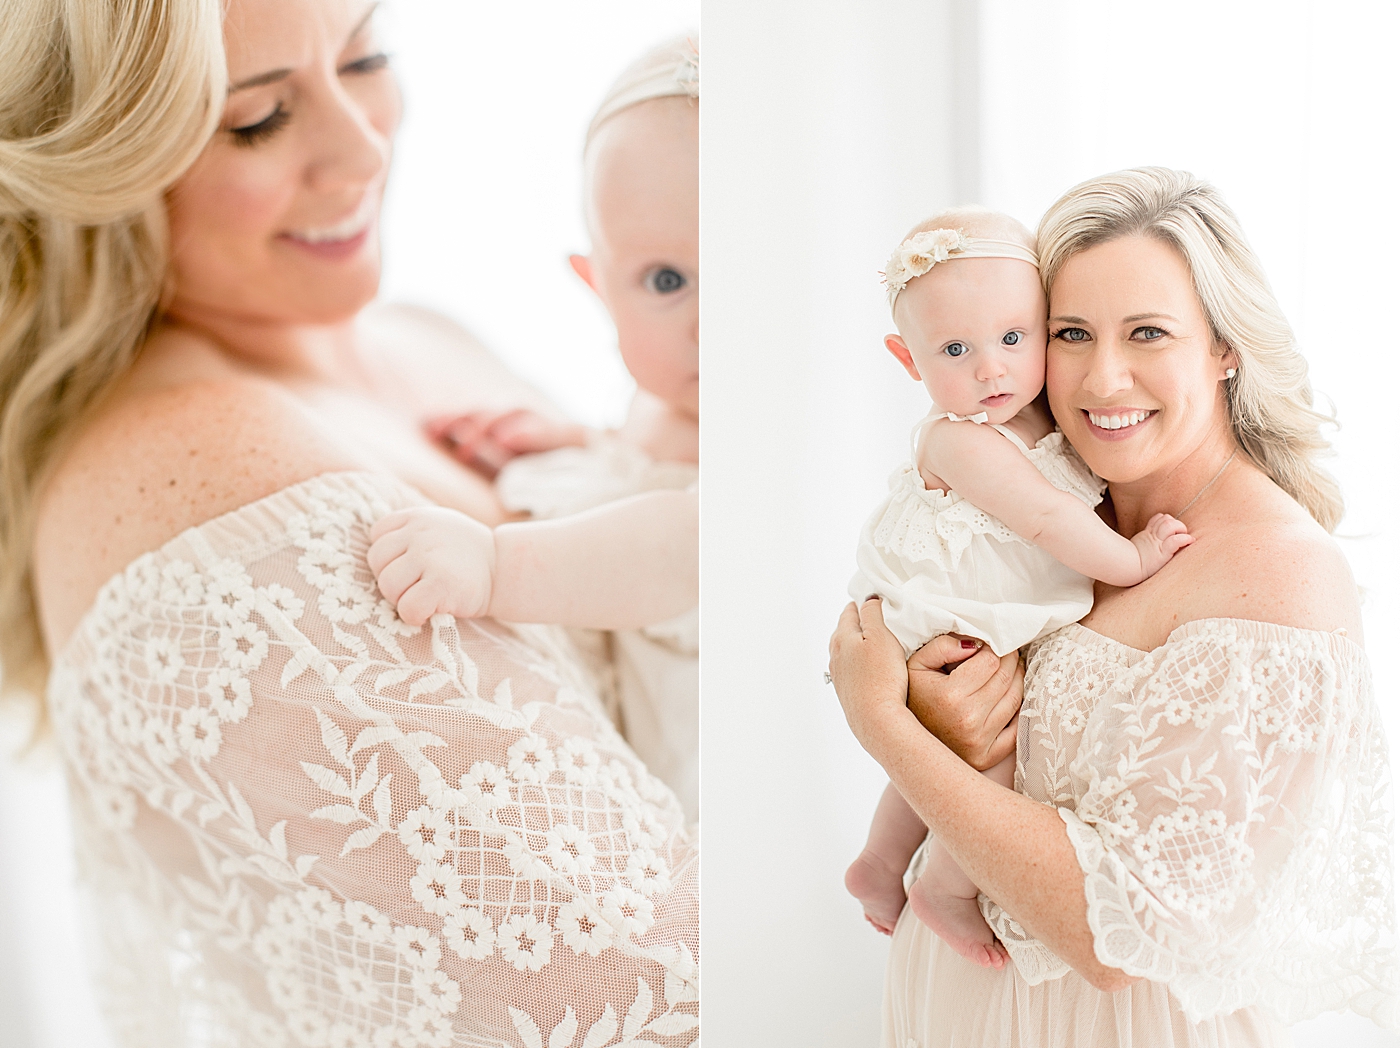 Mom is wearing a lace dress holding her baby girl. Photo by Brittany Elise Photography.